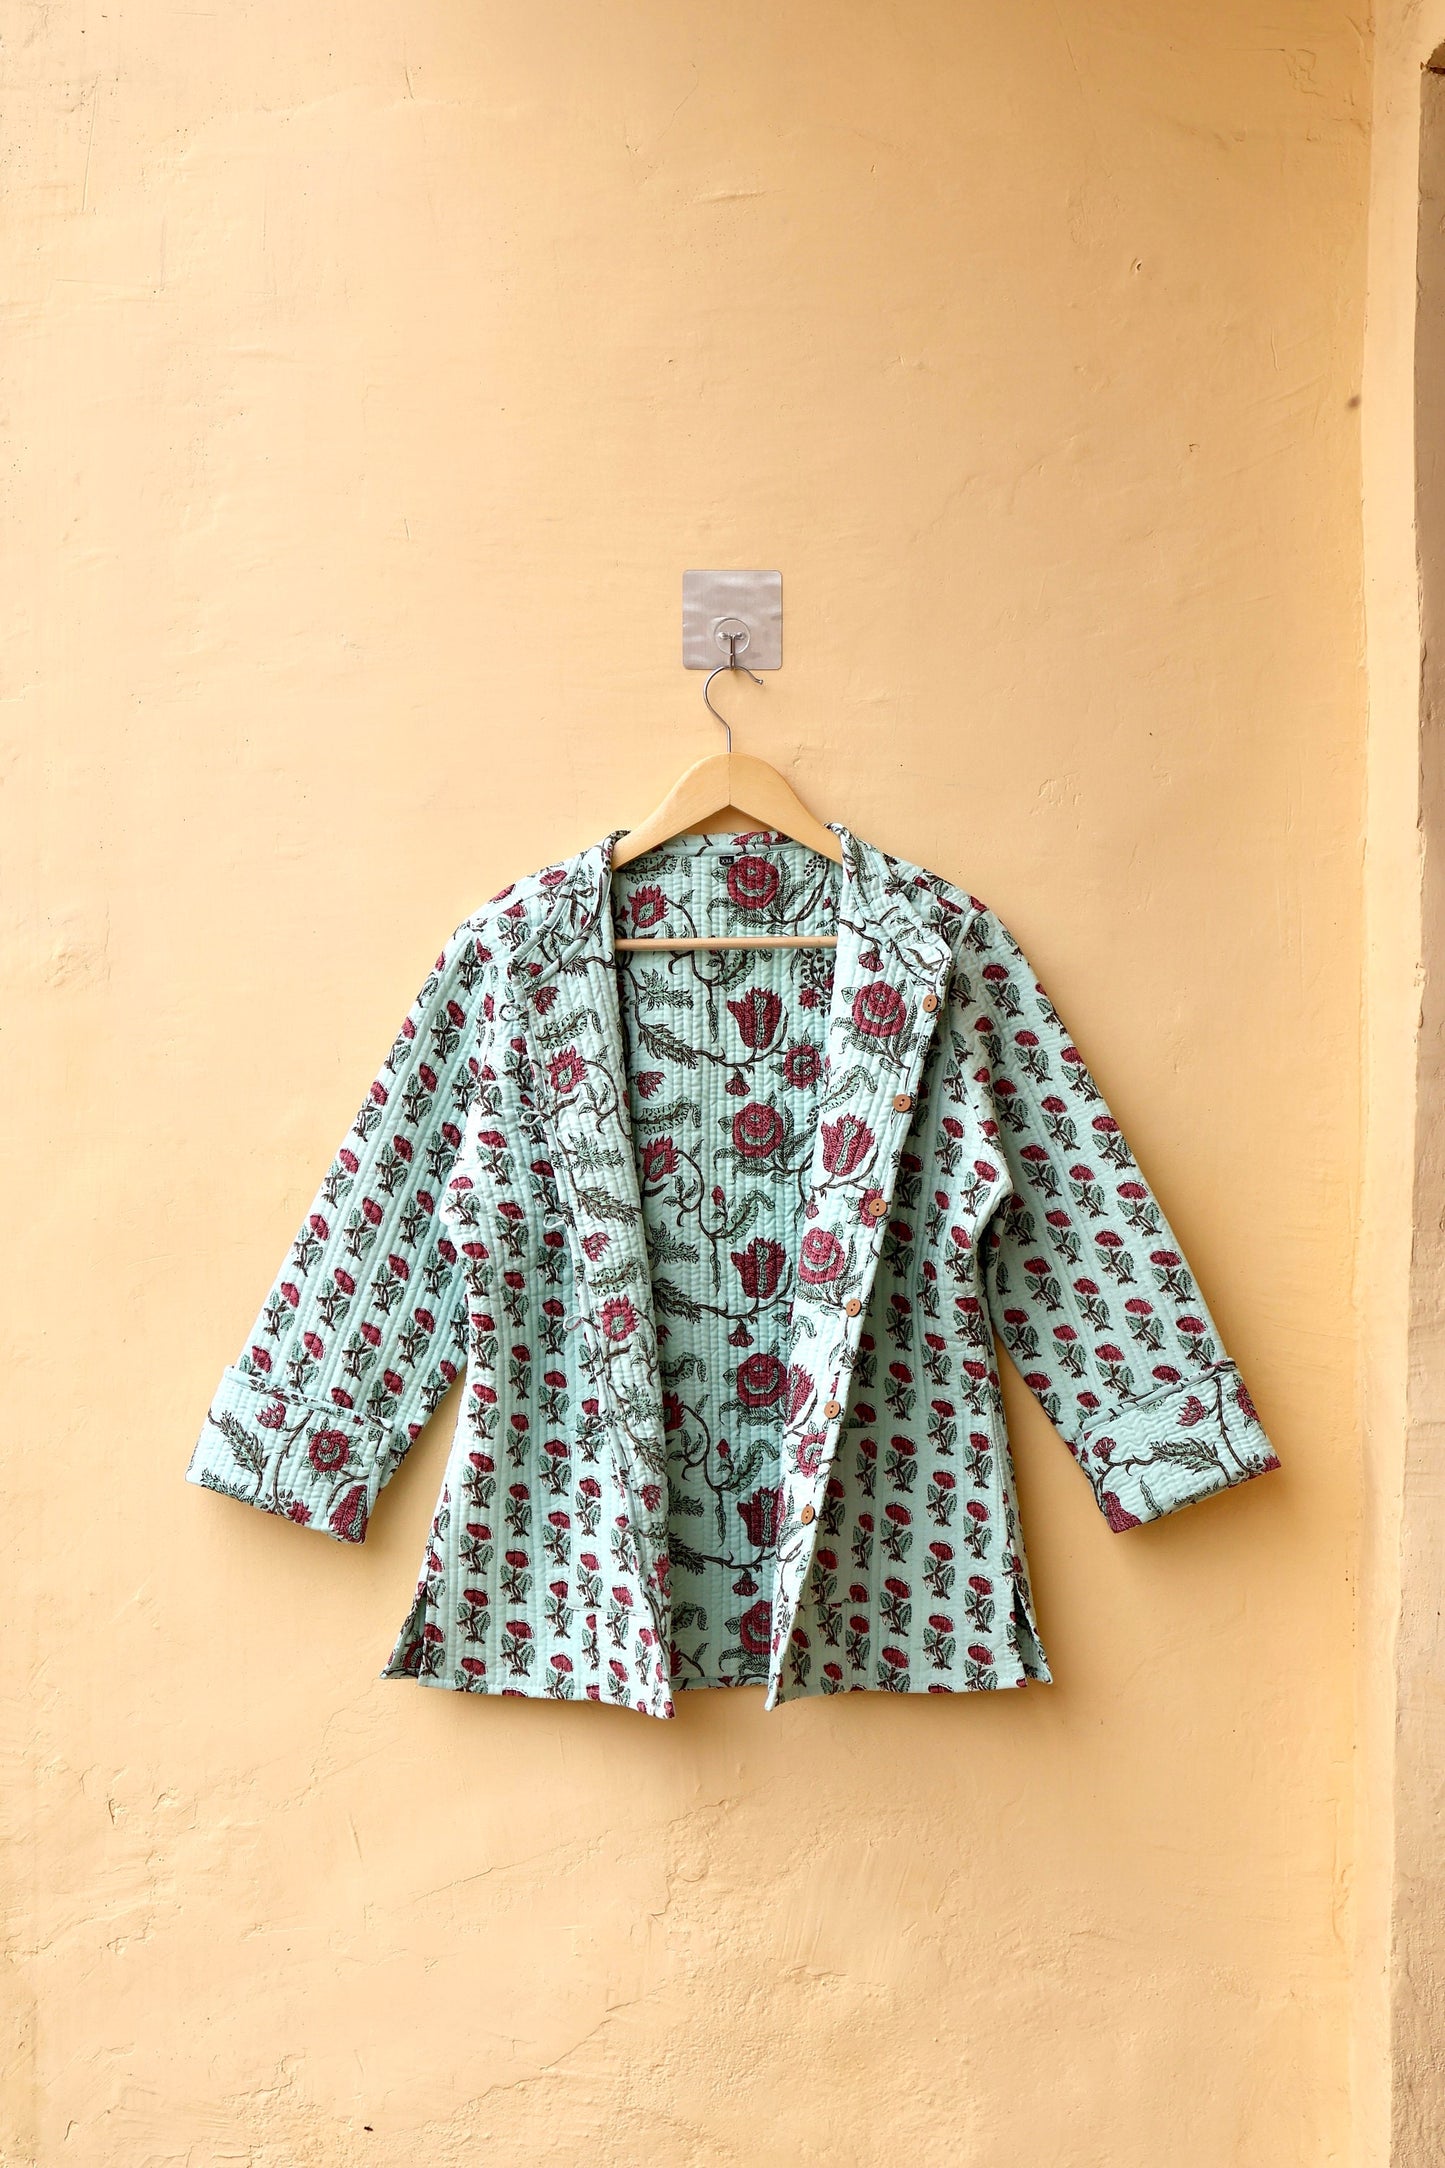 Kantha Quilted Cotton Jacket Stylish Multi Color Hand Block Floral Women's Coat, Indian Handmade Reversible Waistcoat for Her